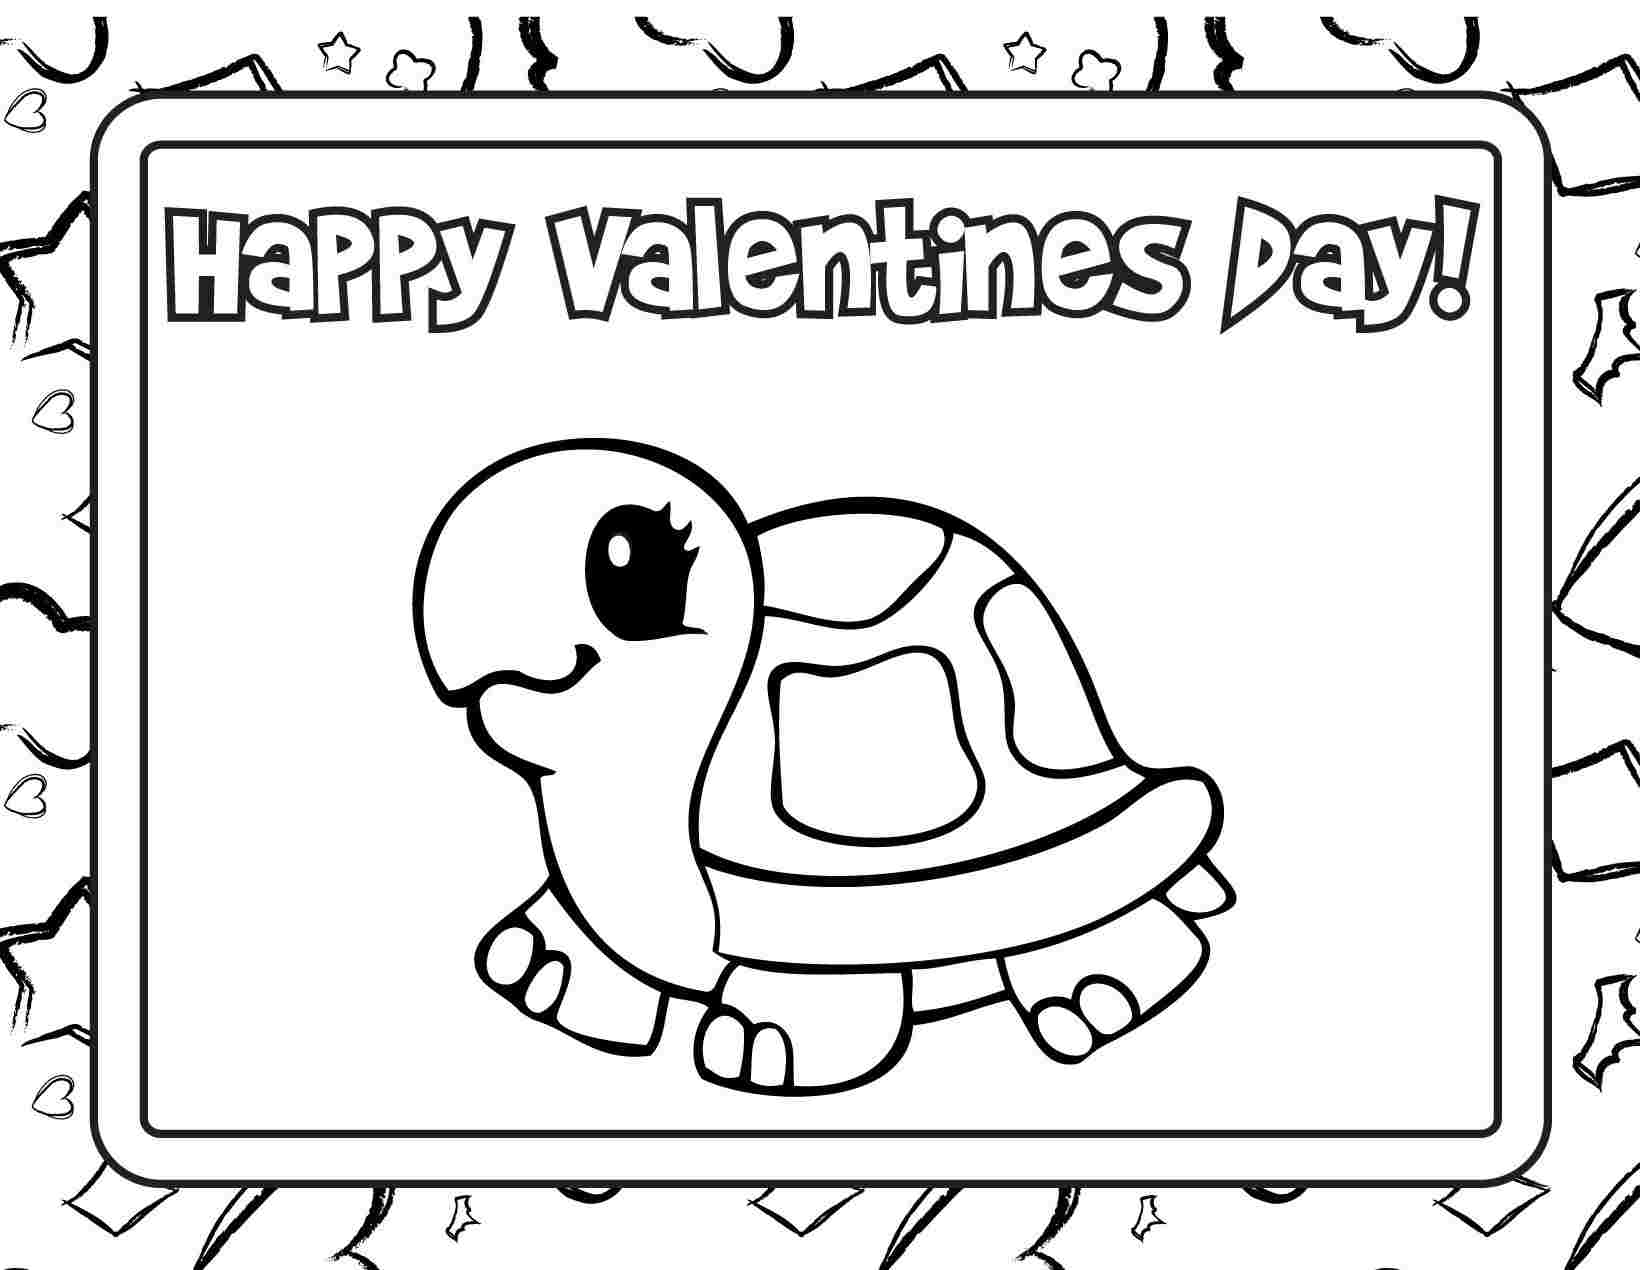 Be My Valentine Printable Coloring Pages - Coloring Pages For All Ages